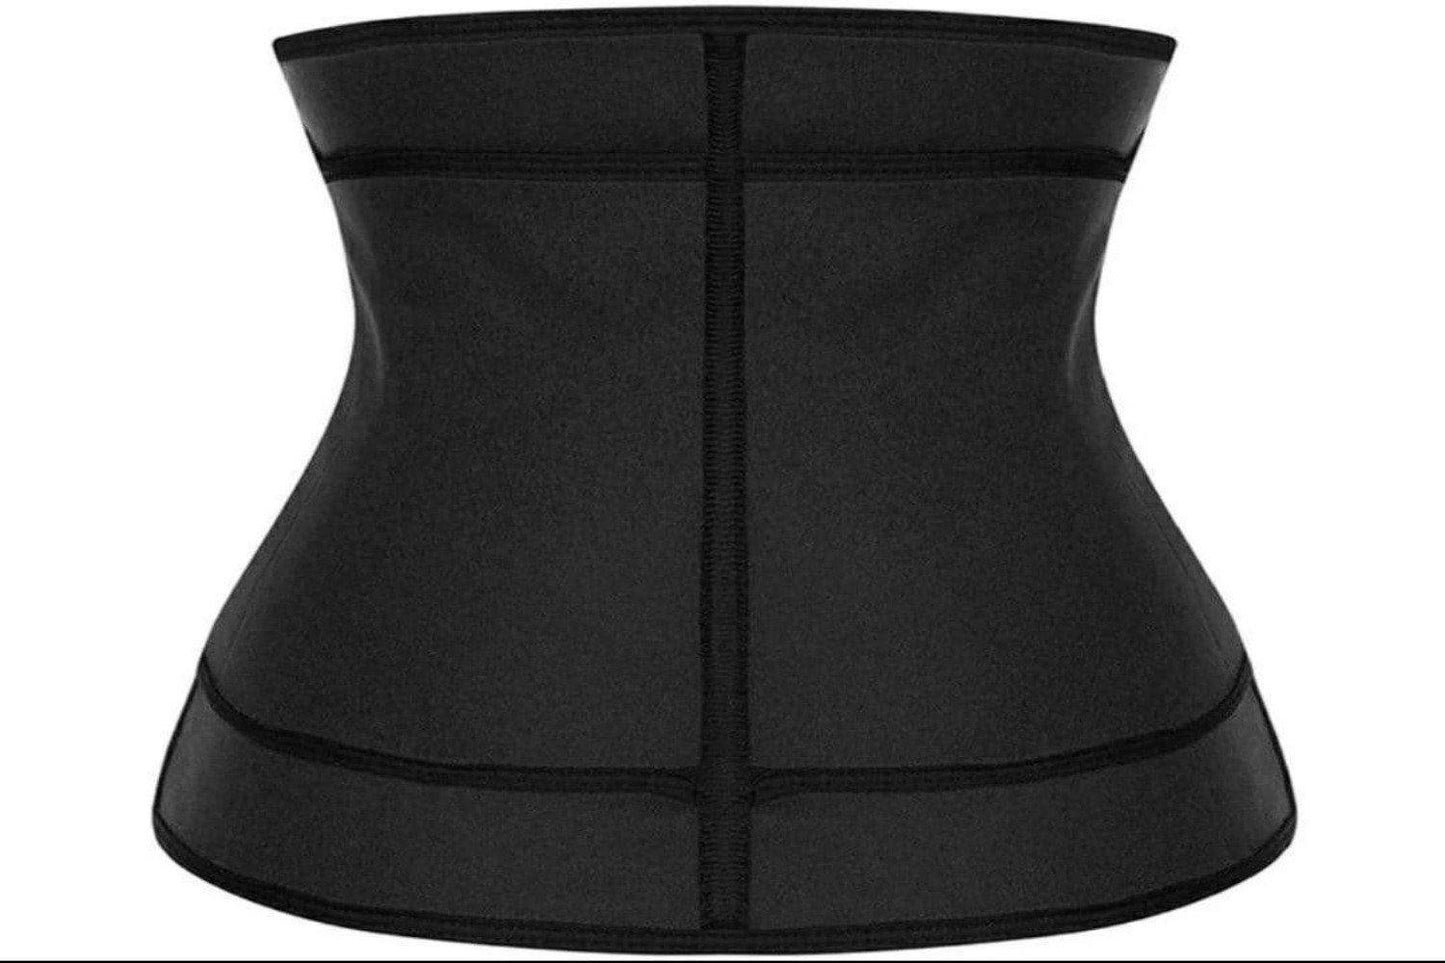 Waist trainer for Weight Loss - Panther®